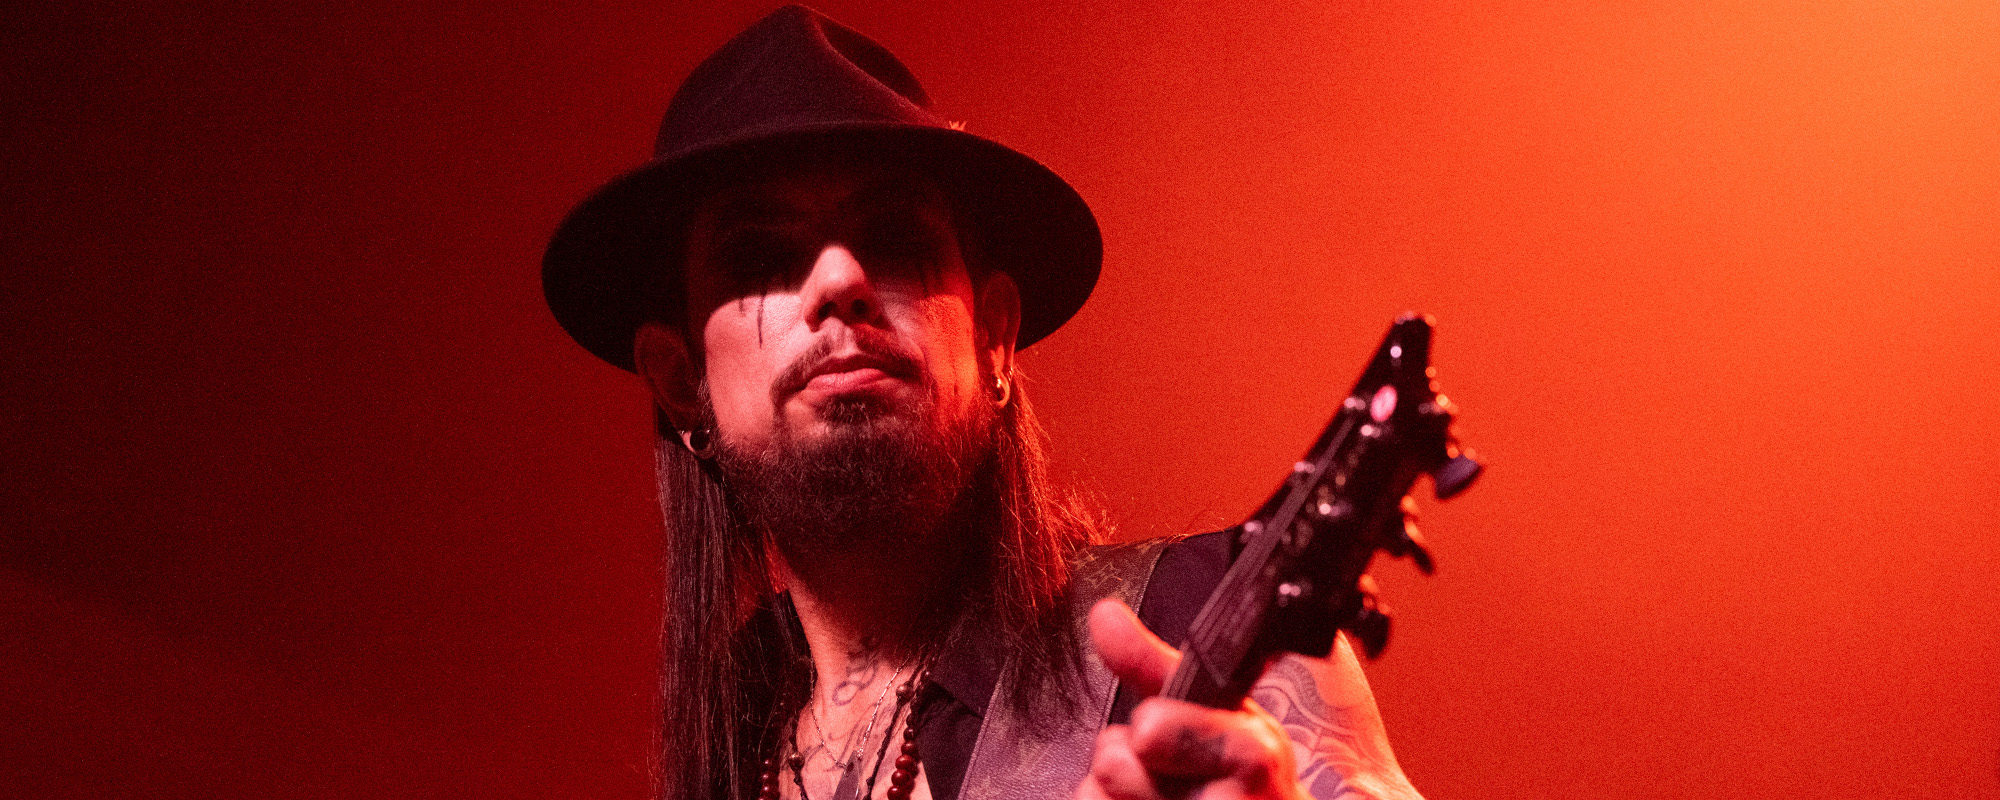 3 Songs You Didn’t Know Jane’s Addiction’s Dave Navarro Wrote